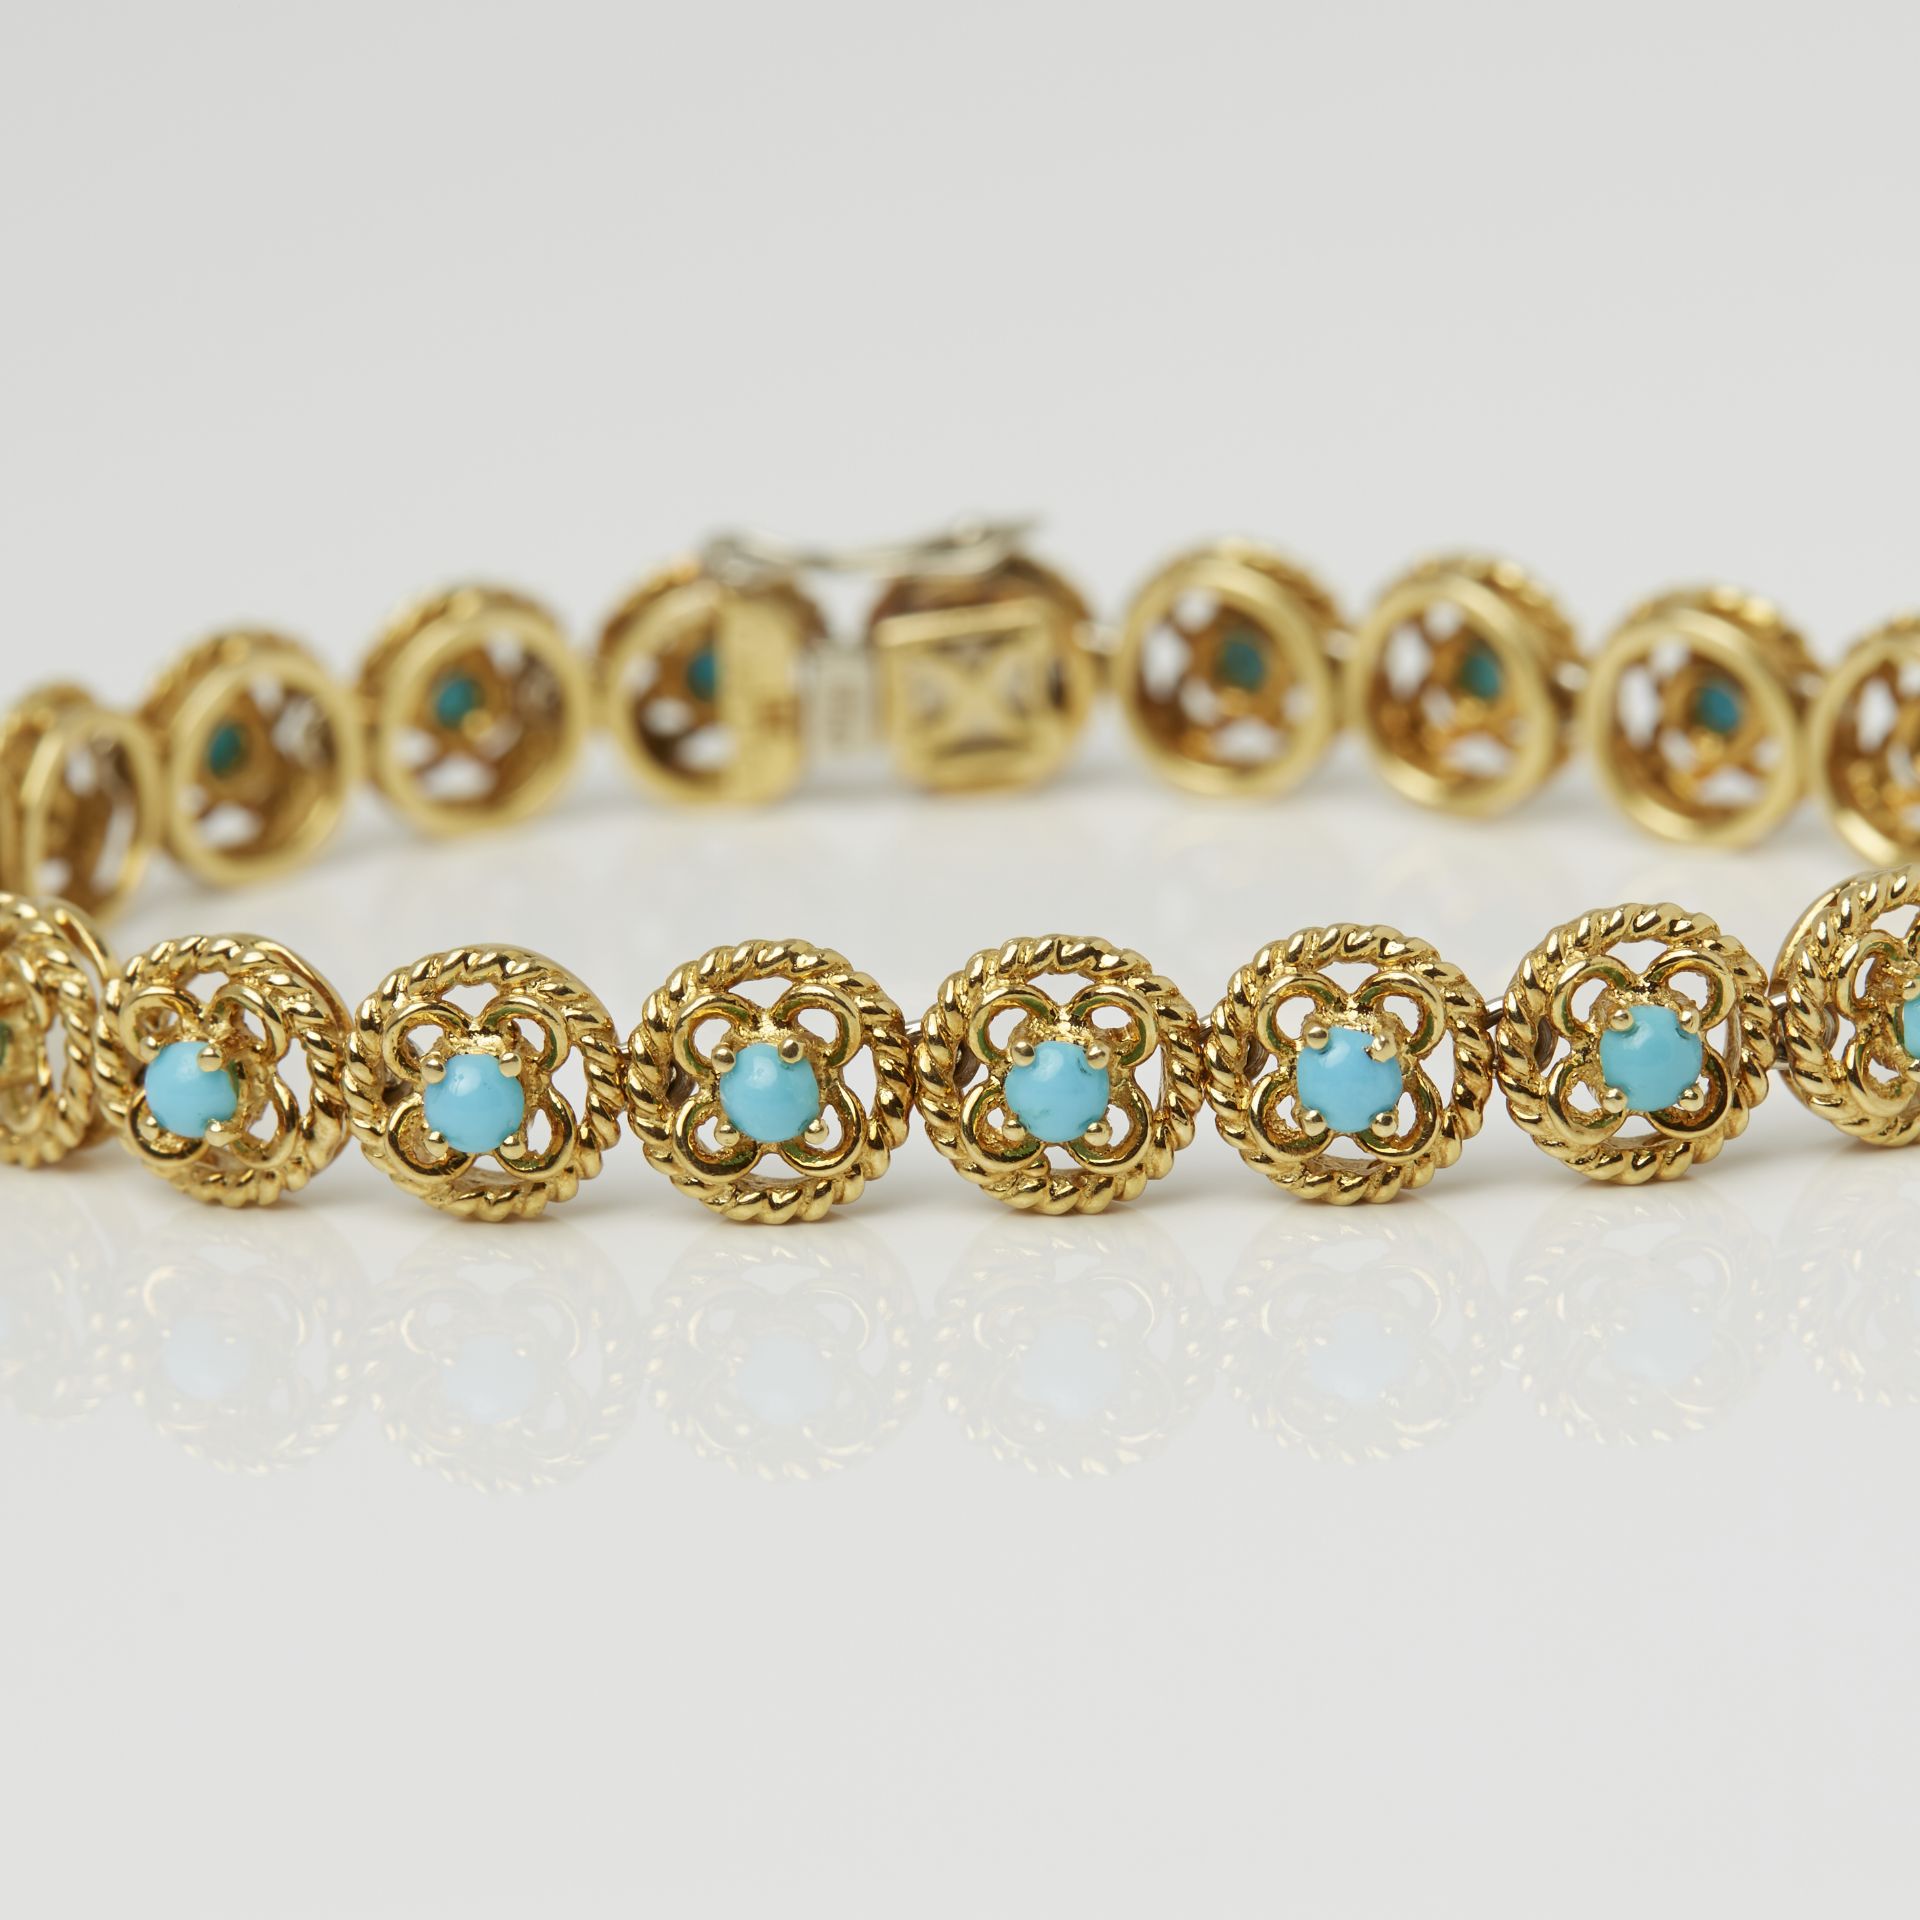 Cartier 18k Yellow Gold Turquoise Bracelet - Image 10 of 12